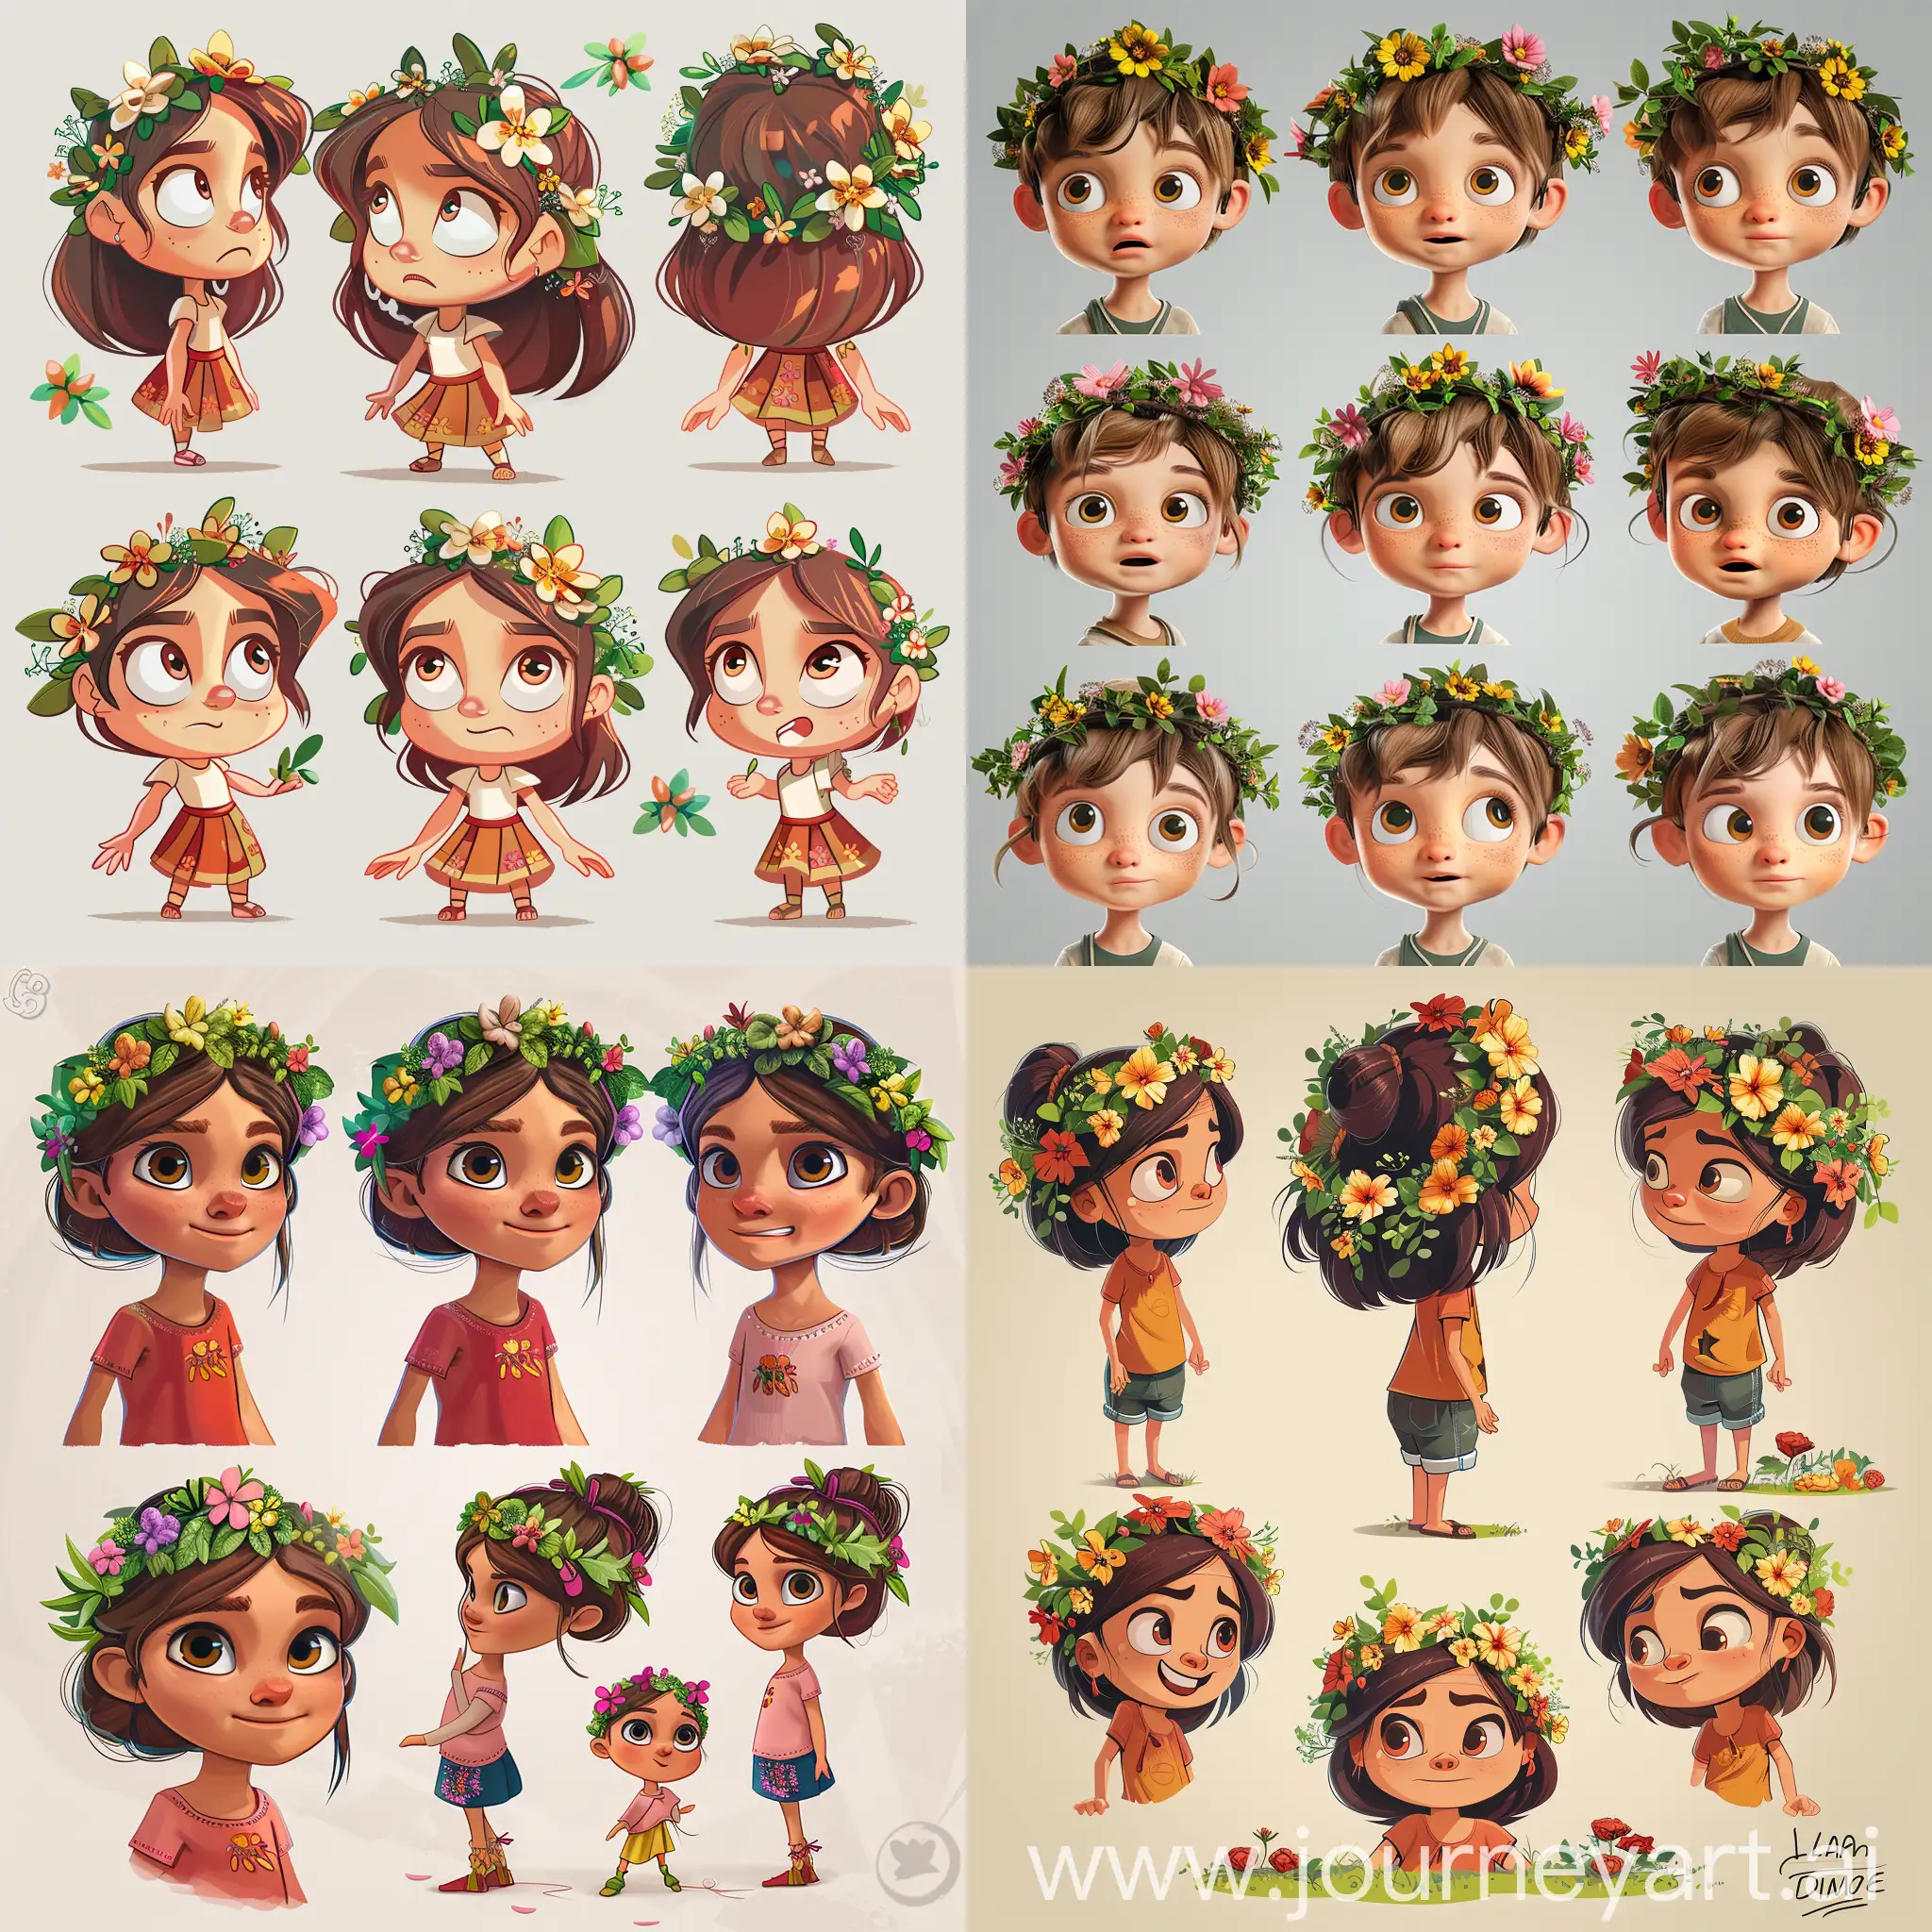 cute 16 year old girl character named Lara wears a wreath of flowers on his head, character sheet, 3 by 2 characters, in different poses, cartoon style, whimsical children's book illustration, colorful story telling, child-like innocence, noise reduction and fine detail, realistic textures, color grading, retouching